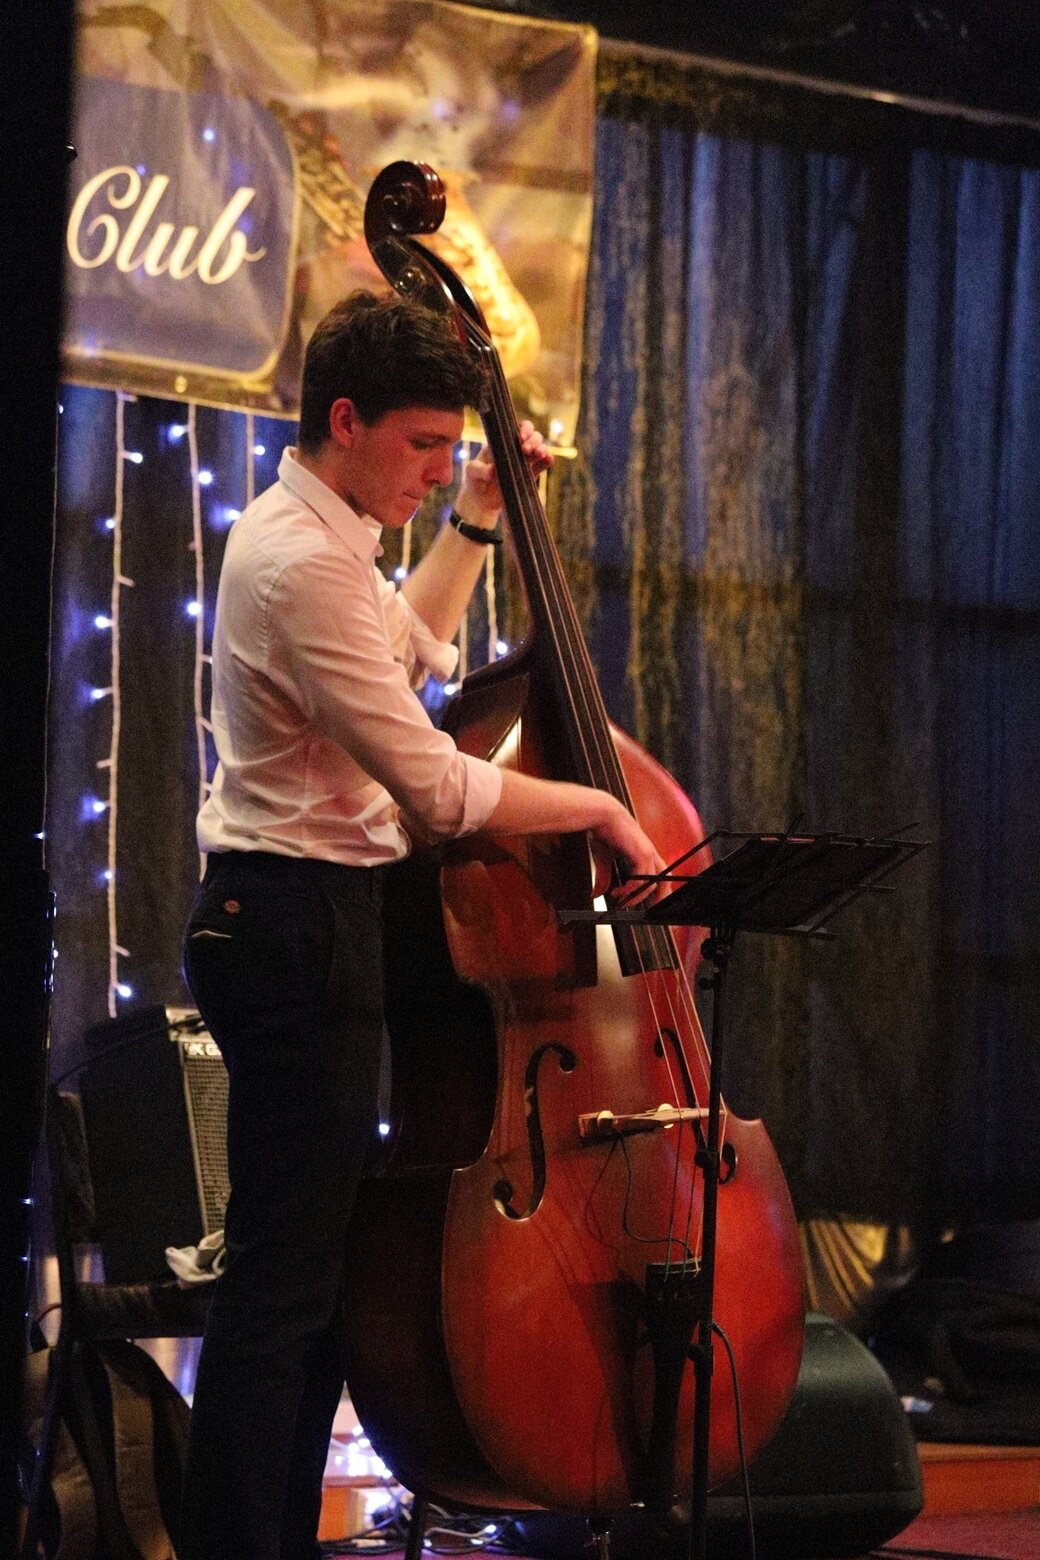 Wil Goodinson - double bass